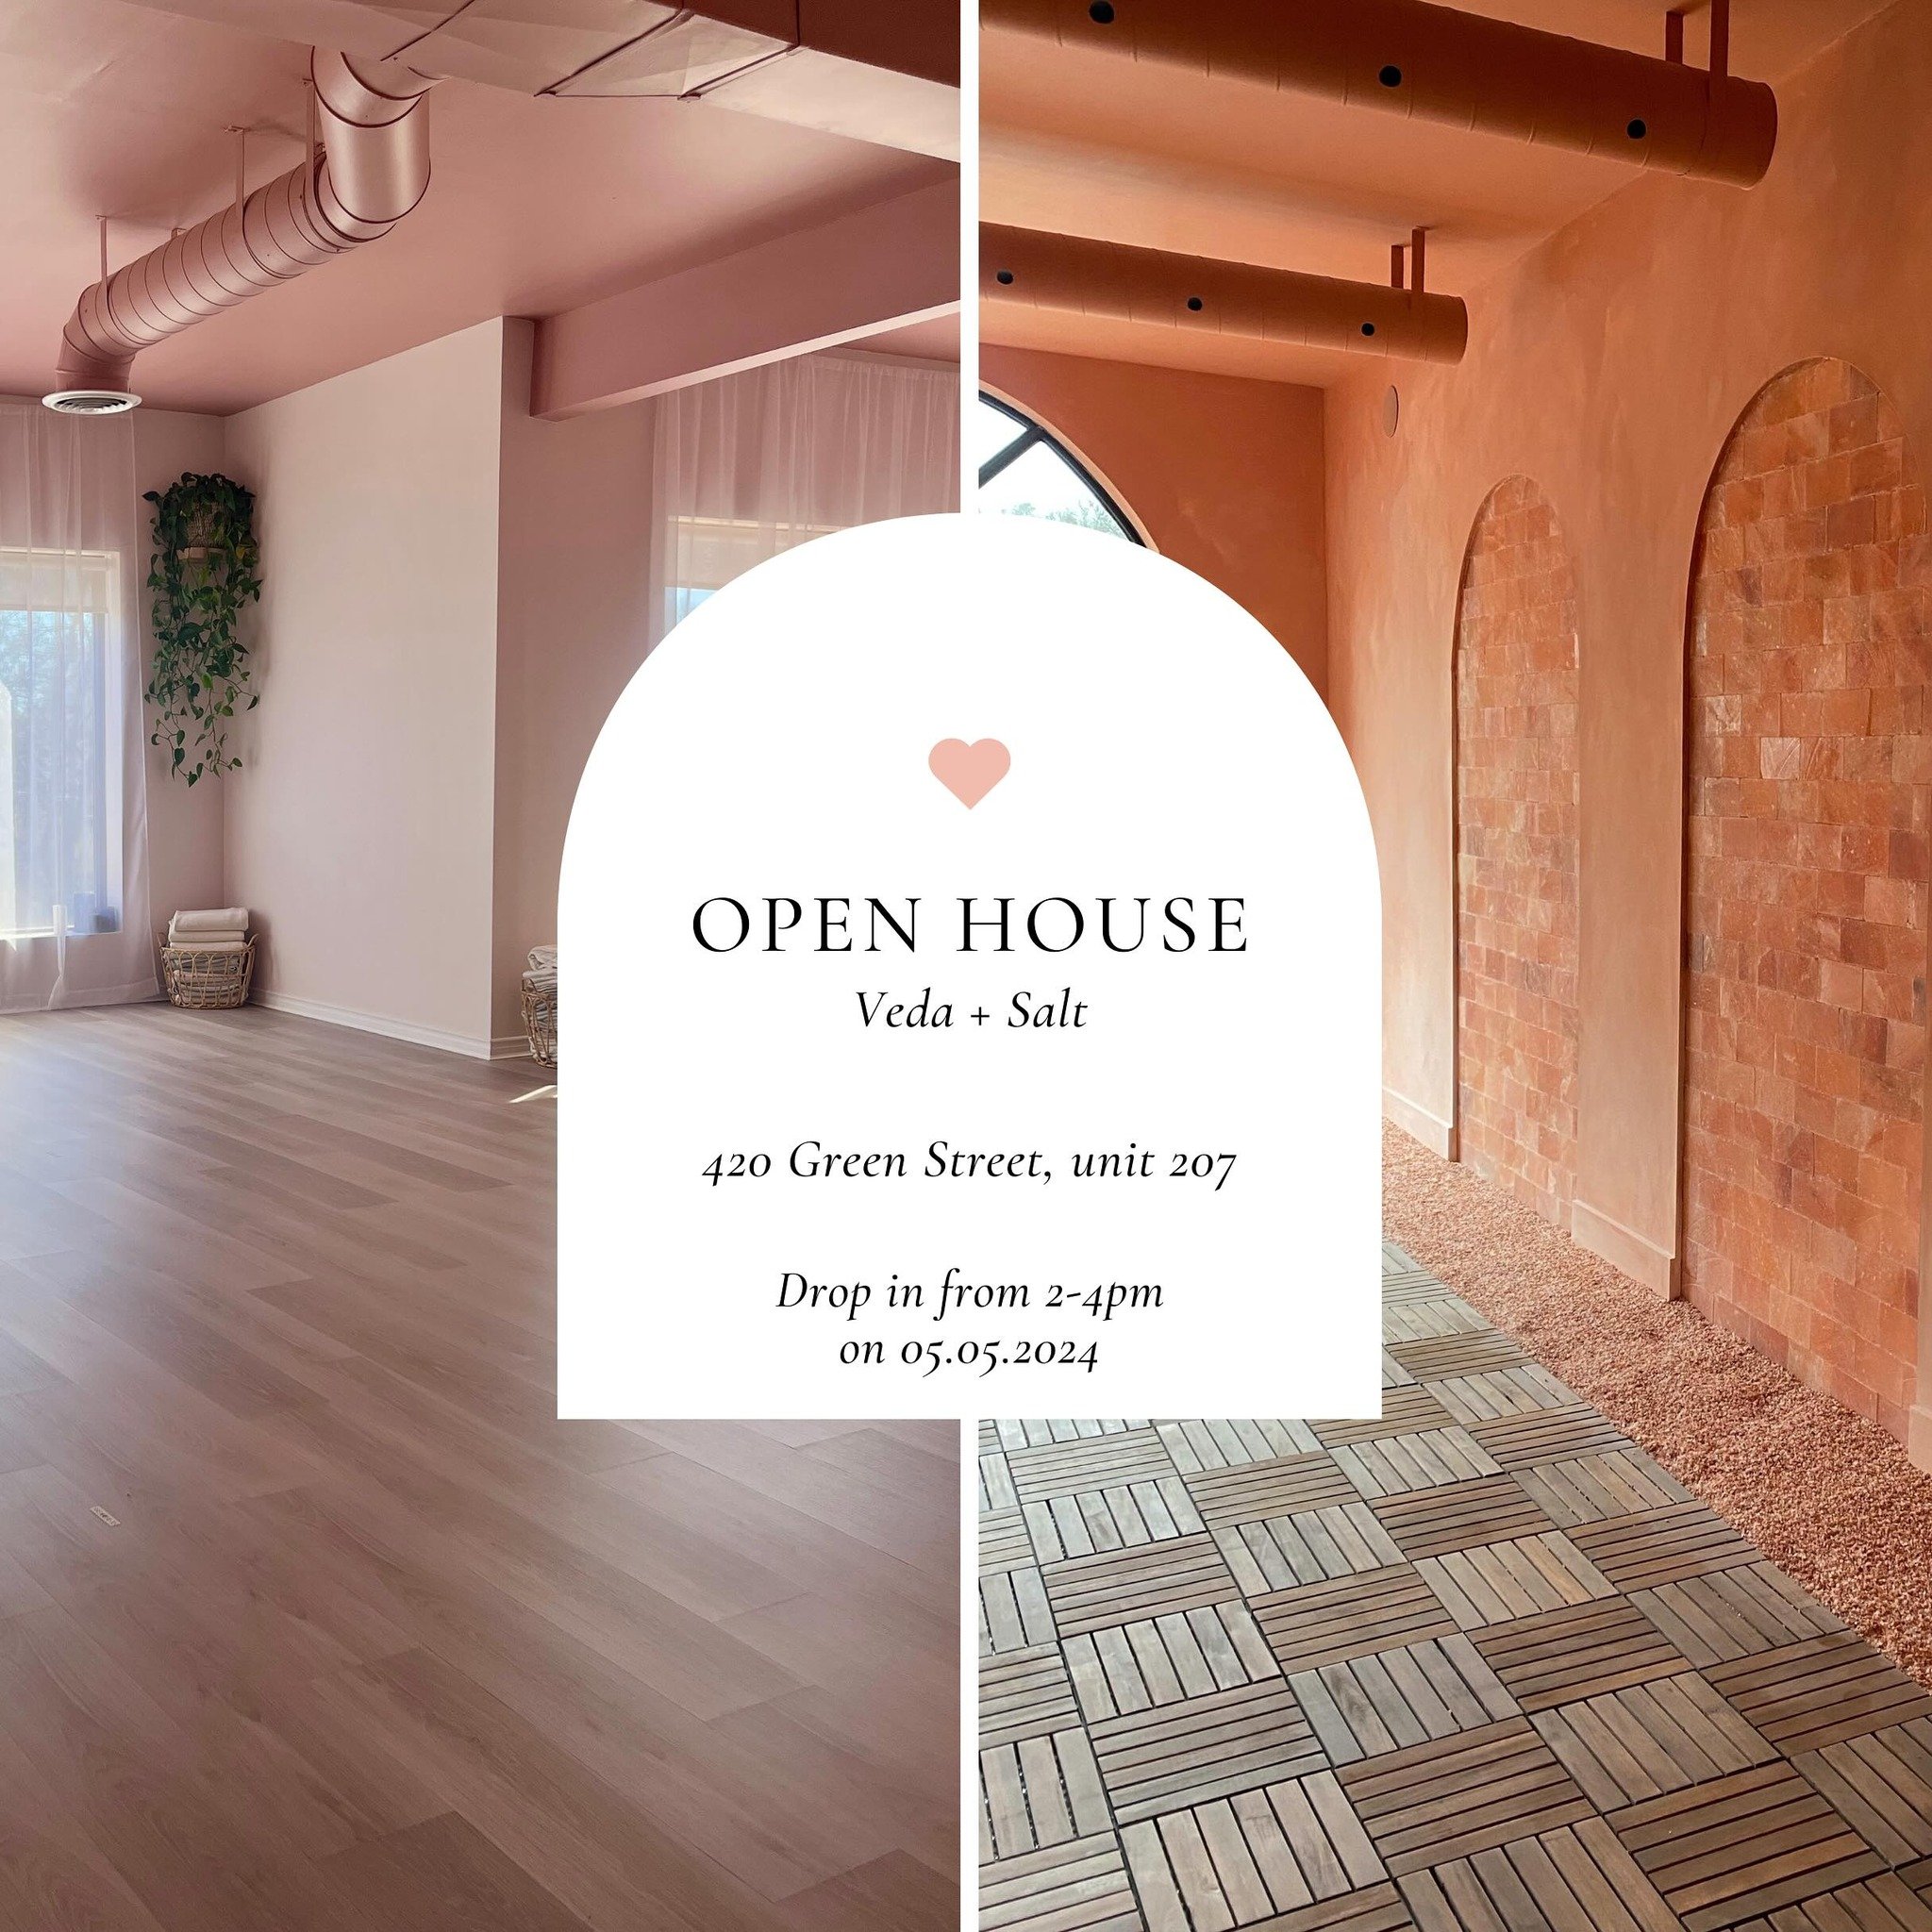 One week until our open house! 🏠

If you&rsquo;ve been wanting to check out our new studio, or if you&rsquo;ve been telling a friend to come with you&hellip;this is the day to do it!

Sophie and Amanda will be on site for any questions about Veda an